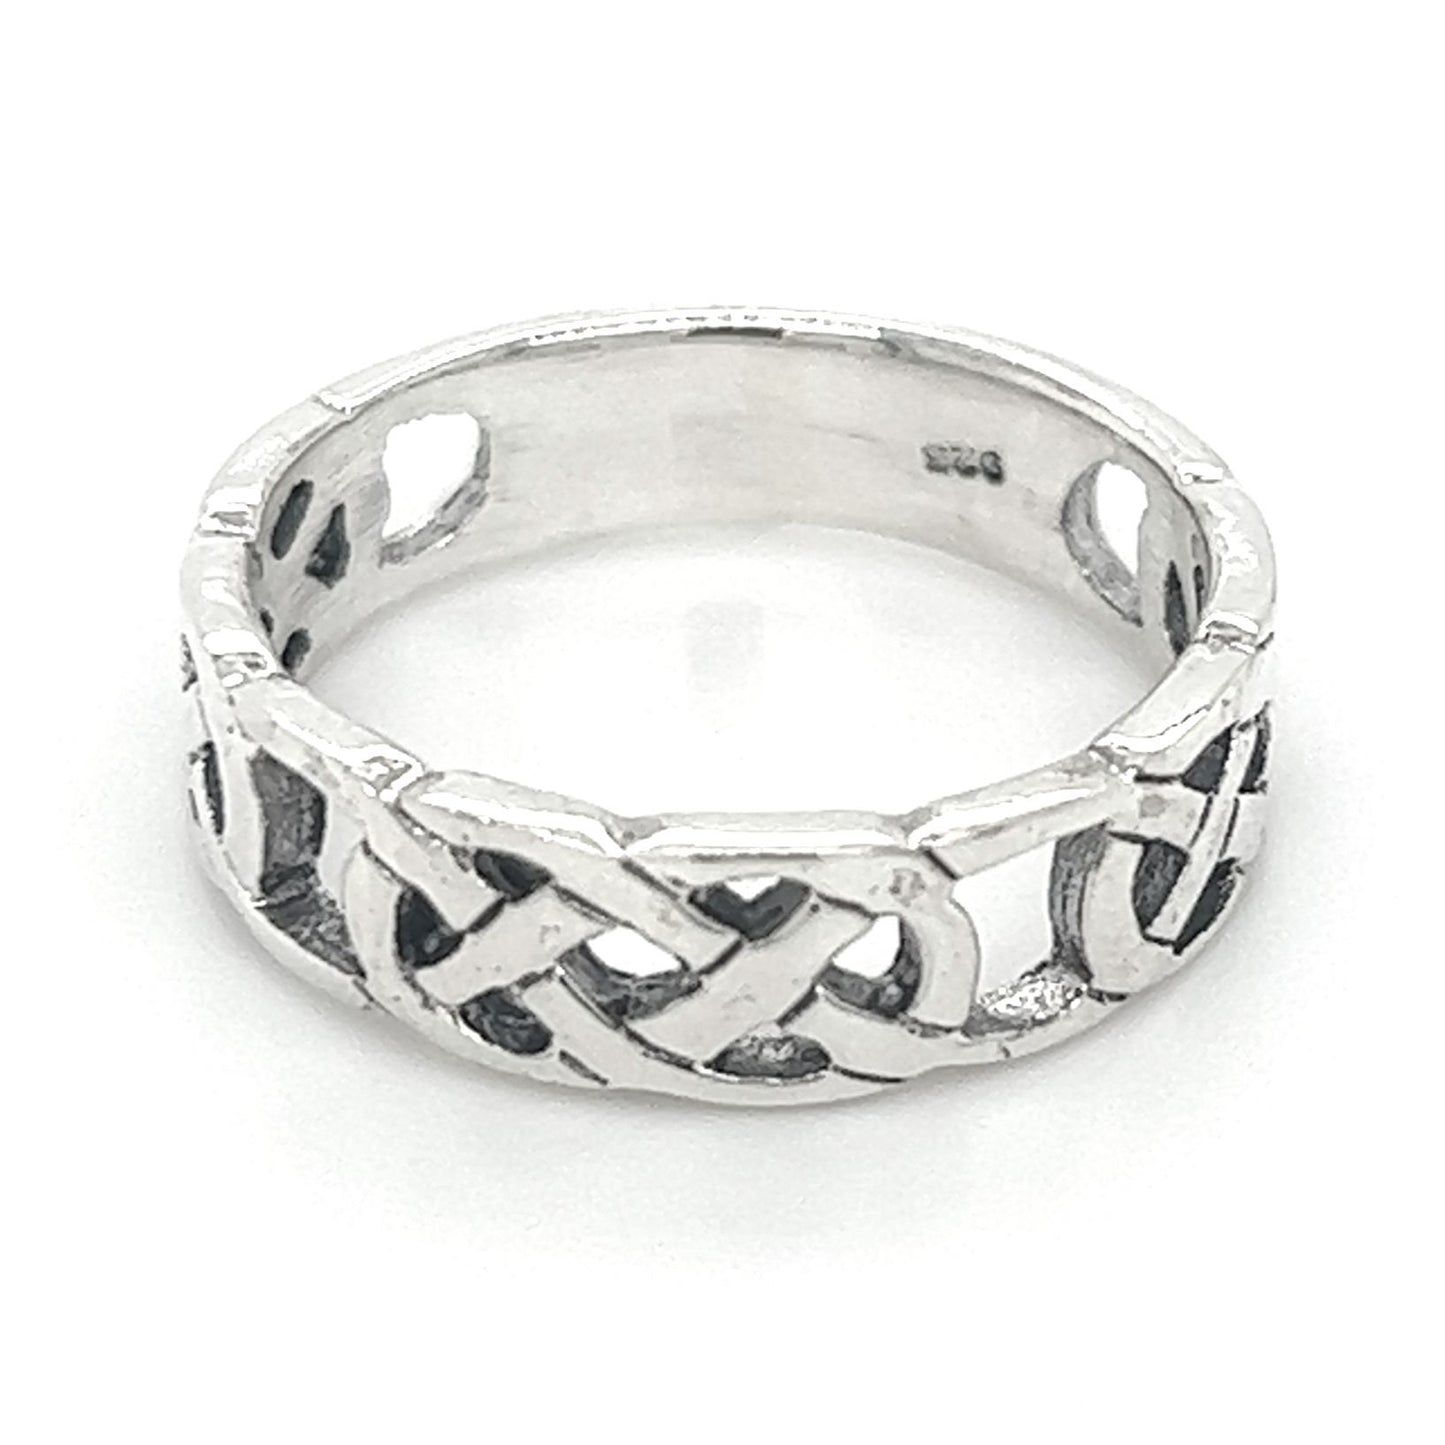 This sterling silver 5mm Celtic Knot Band embodies both strength and style.